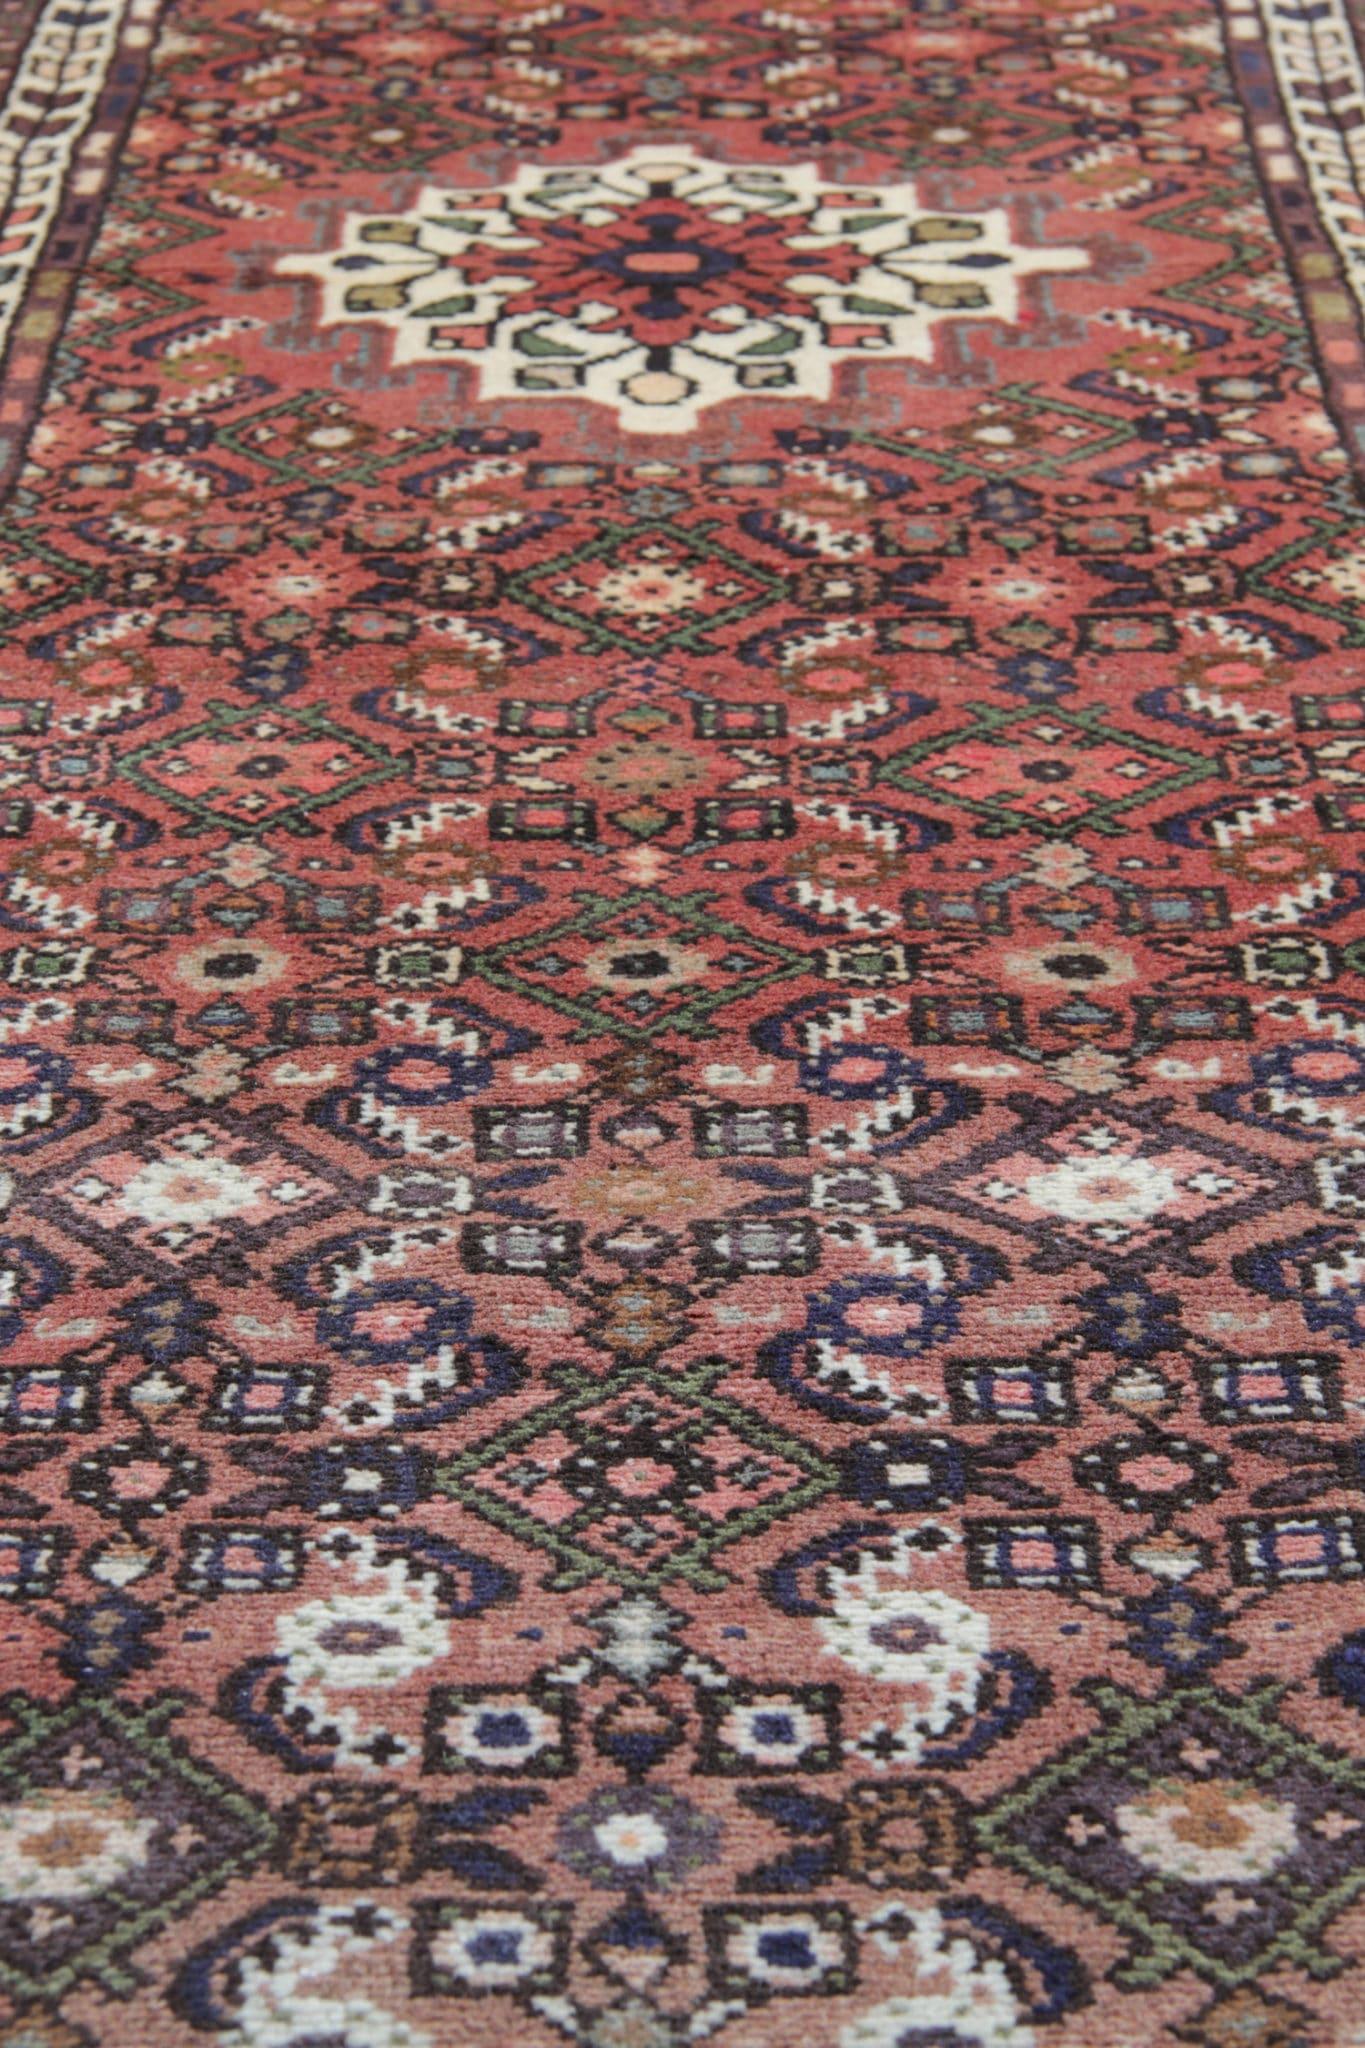 Vintage Runner Geometric Farahan Runner Rug, Red Carpet Runner, Wool Rug In Excellent Condition For Sale In Hampshire, GB